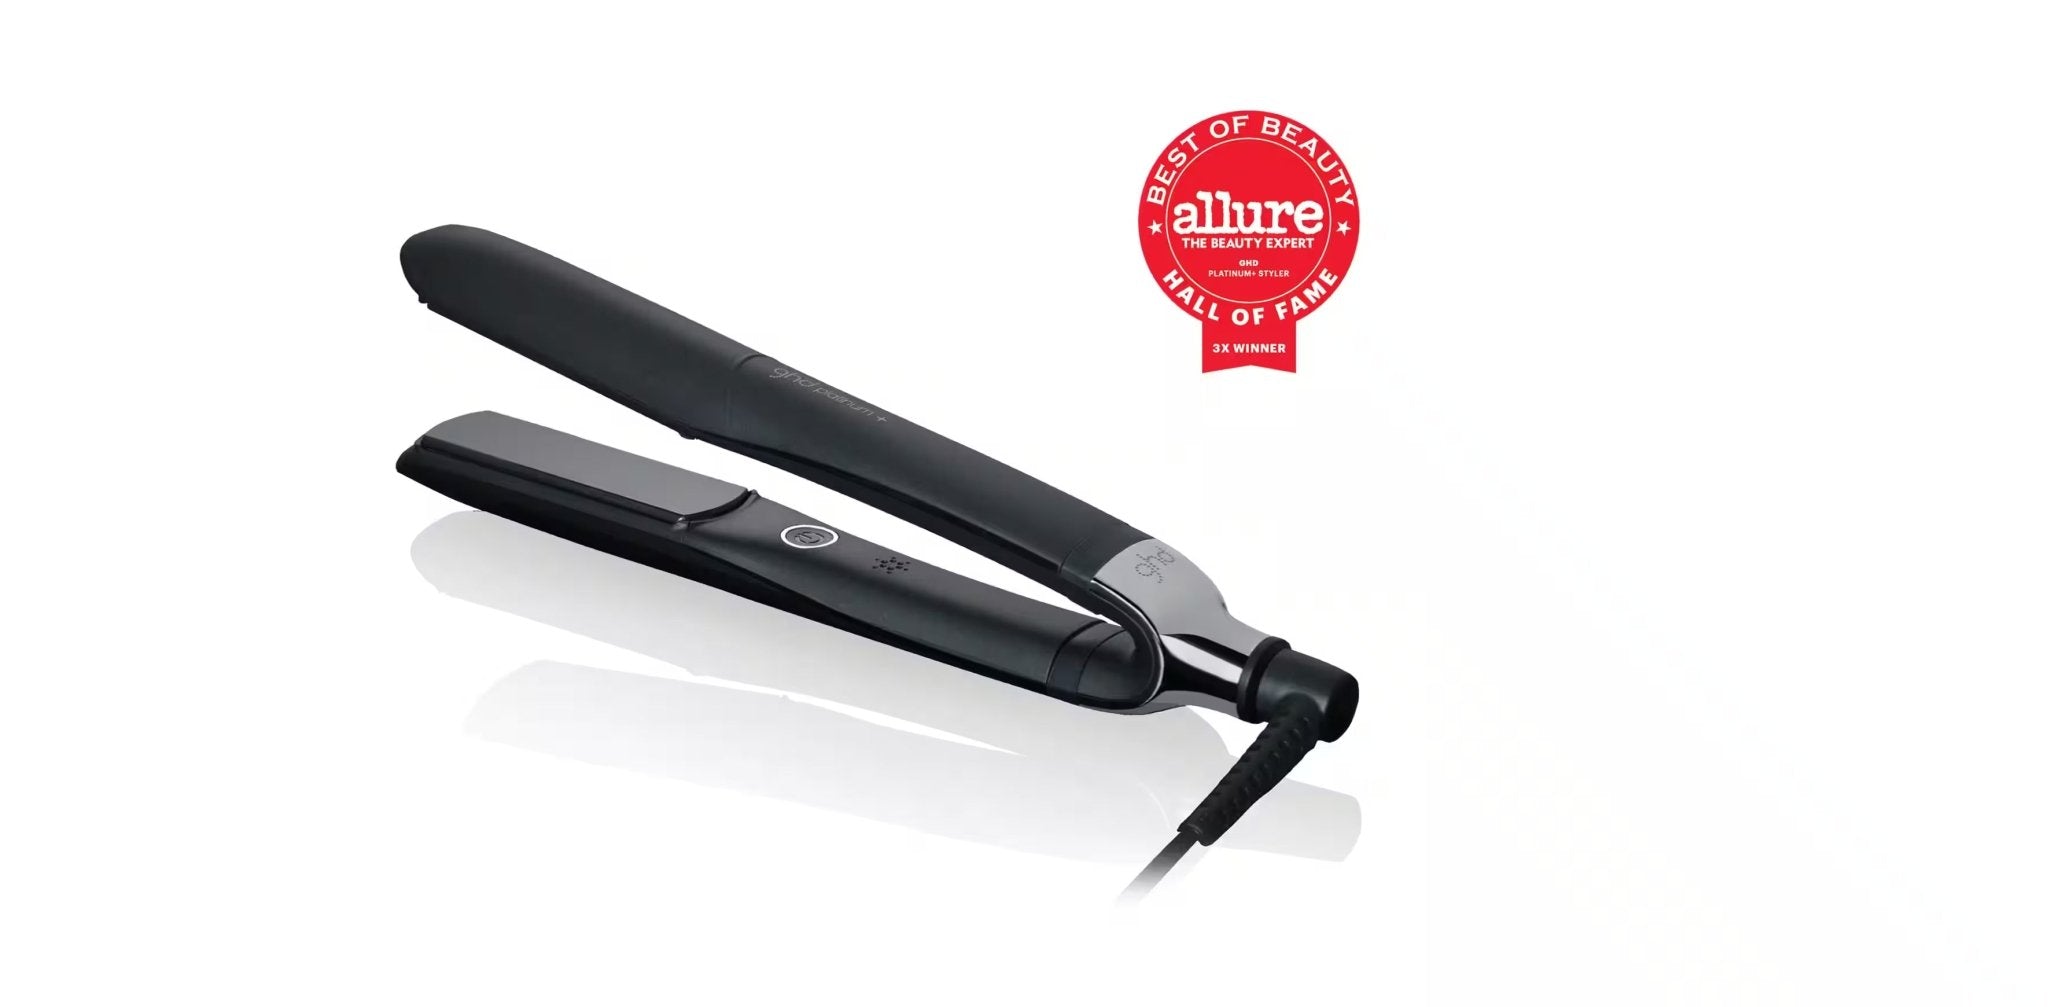 A black GHD PLATINUM+ STYLER - 1" FLAT IRON with a red "Allure Best of Beauty Hall of Fame" award badge against a white background, this smart styler offers personalized styling and the ability to create perfect flat iron waves.